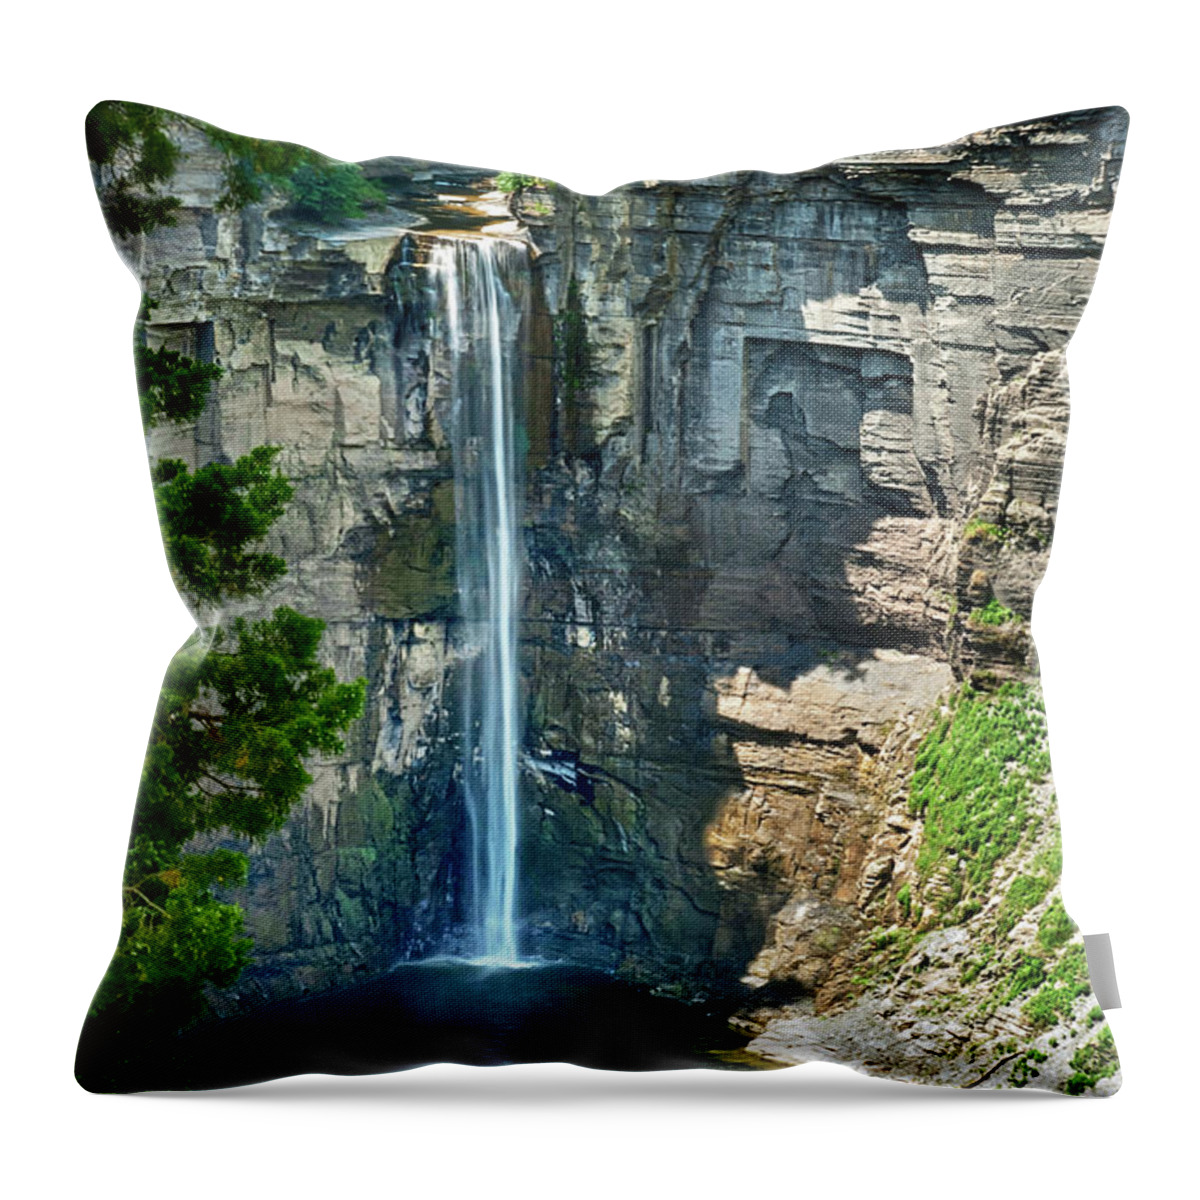 Taughannock Falls Throw Pillow featuring the photograph Taughannock Falls by Christina Rollo